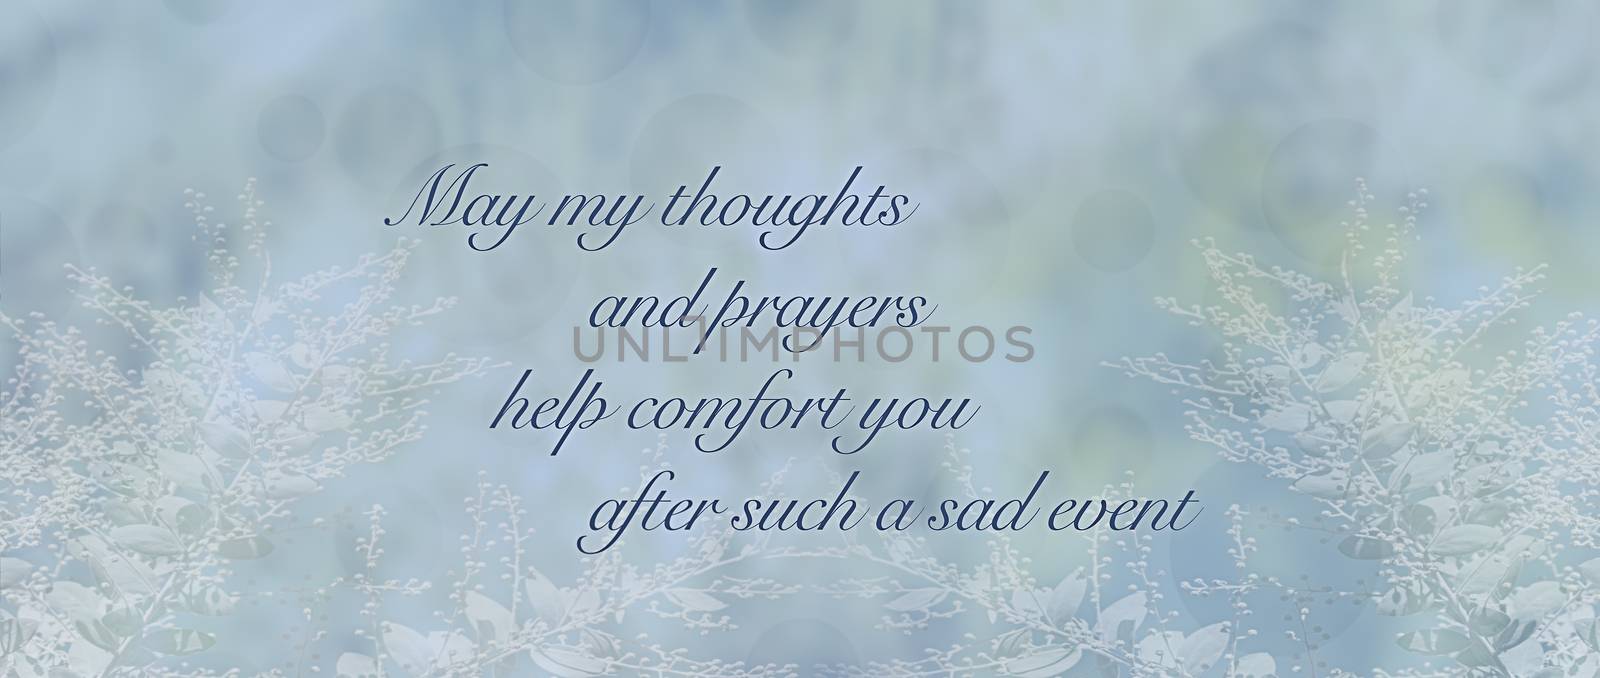 Panoramic condolence sympathy card message for sad event or loss on a soft blue floral background